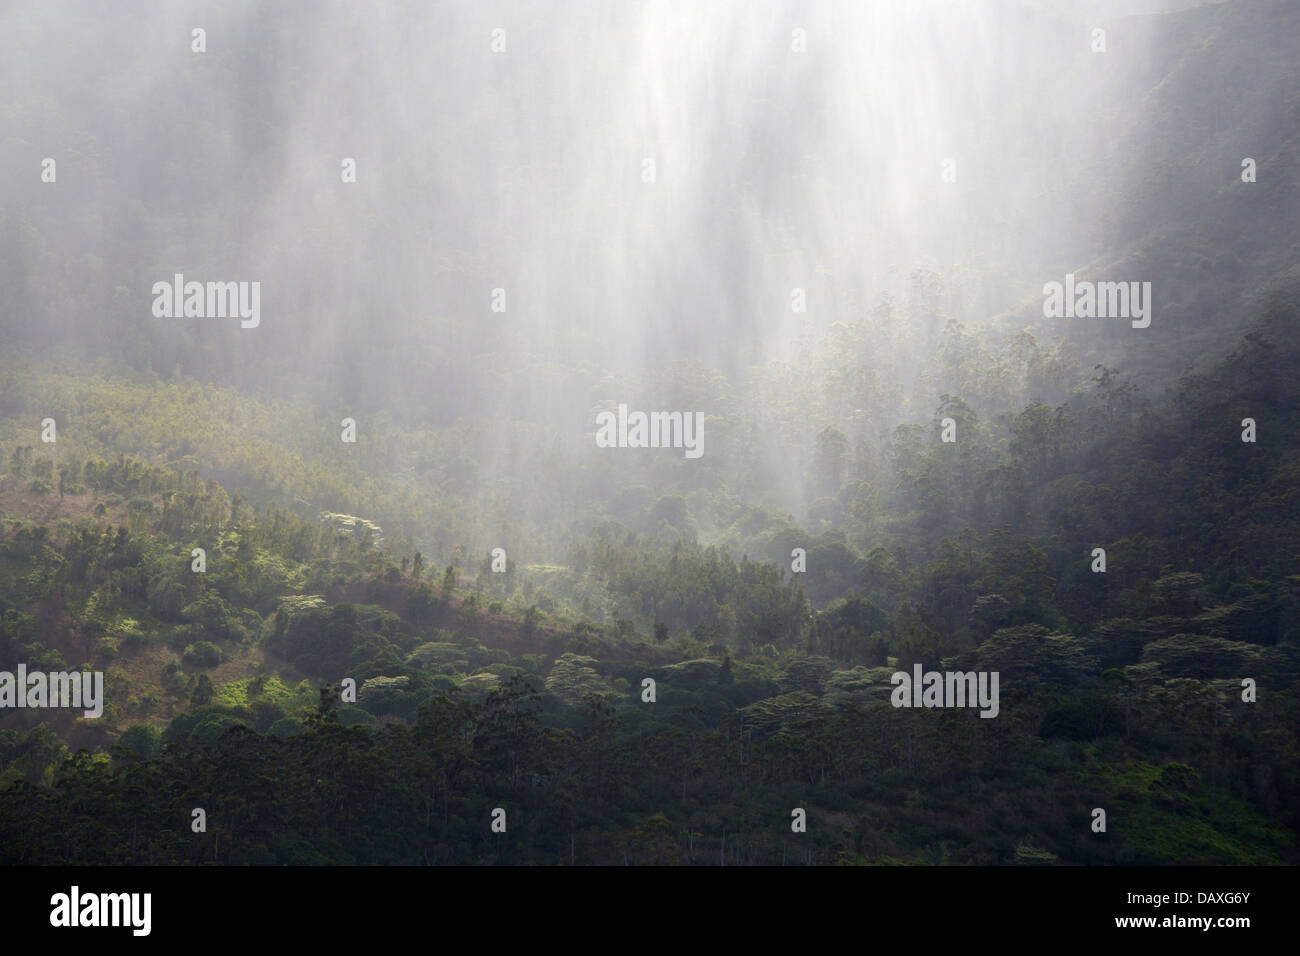 Heavy, localized downpour hits a green valley on the island of Kauai, Hawaii. Stock Photo